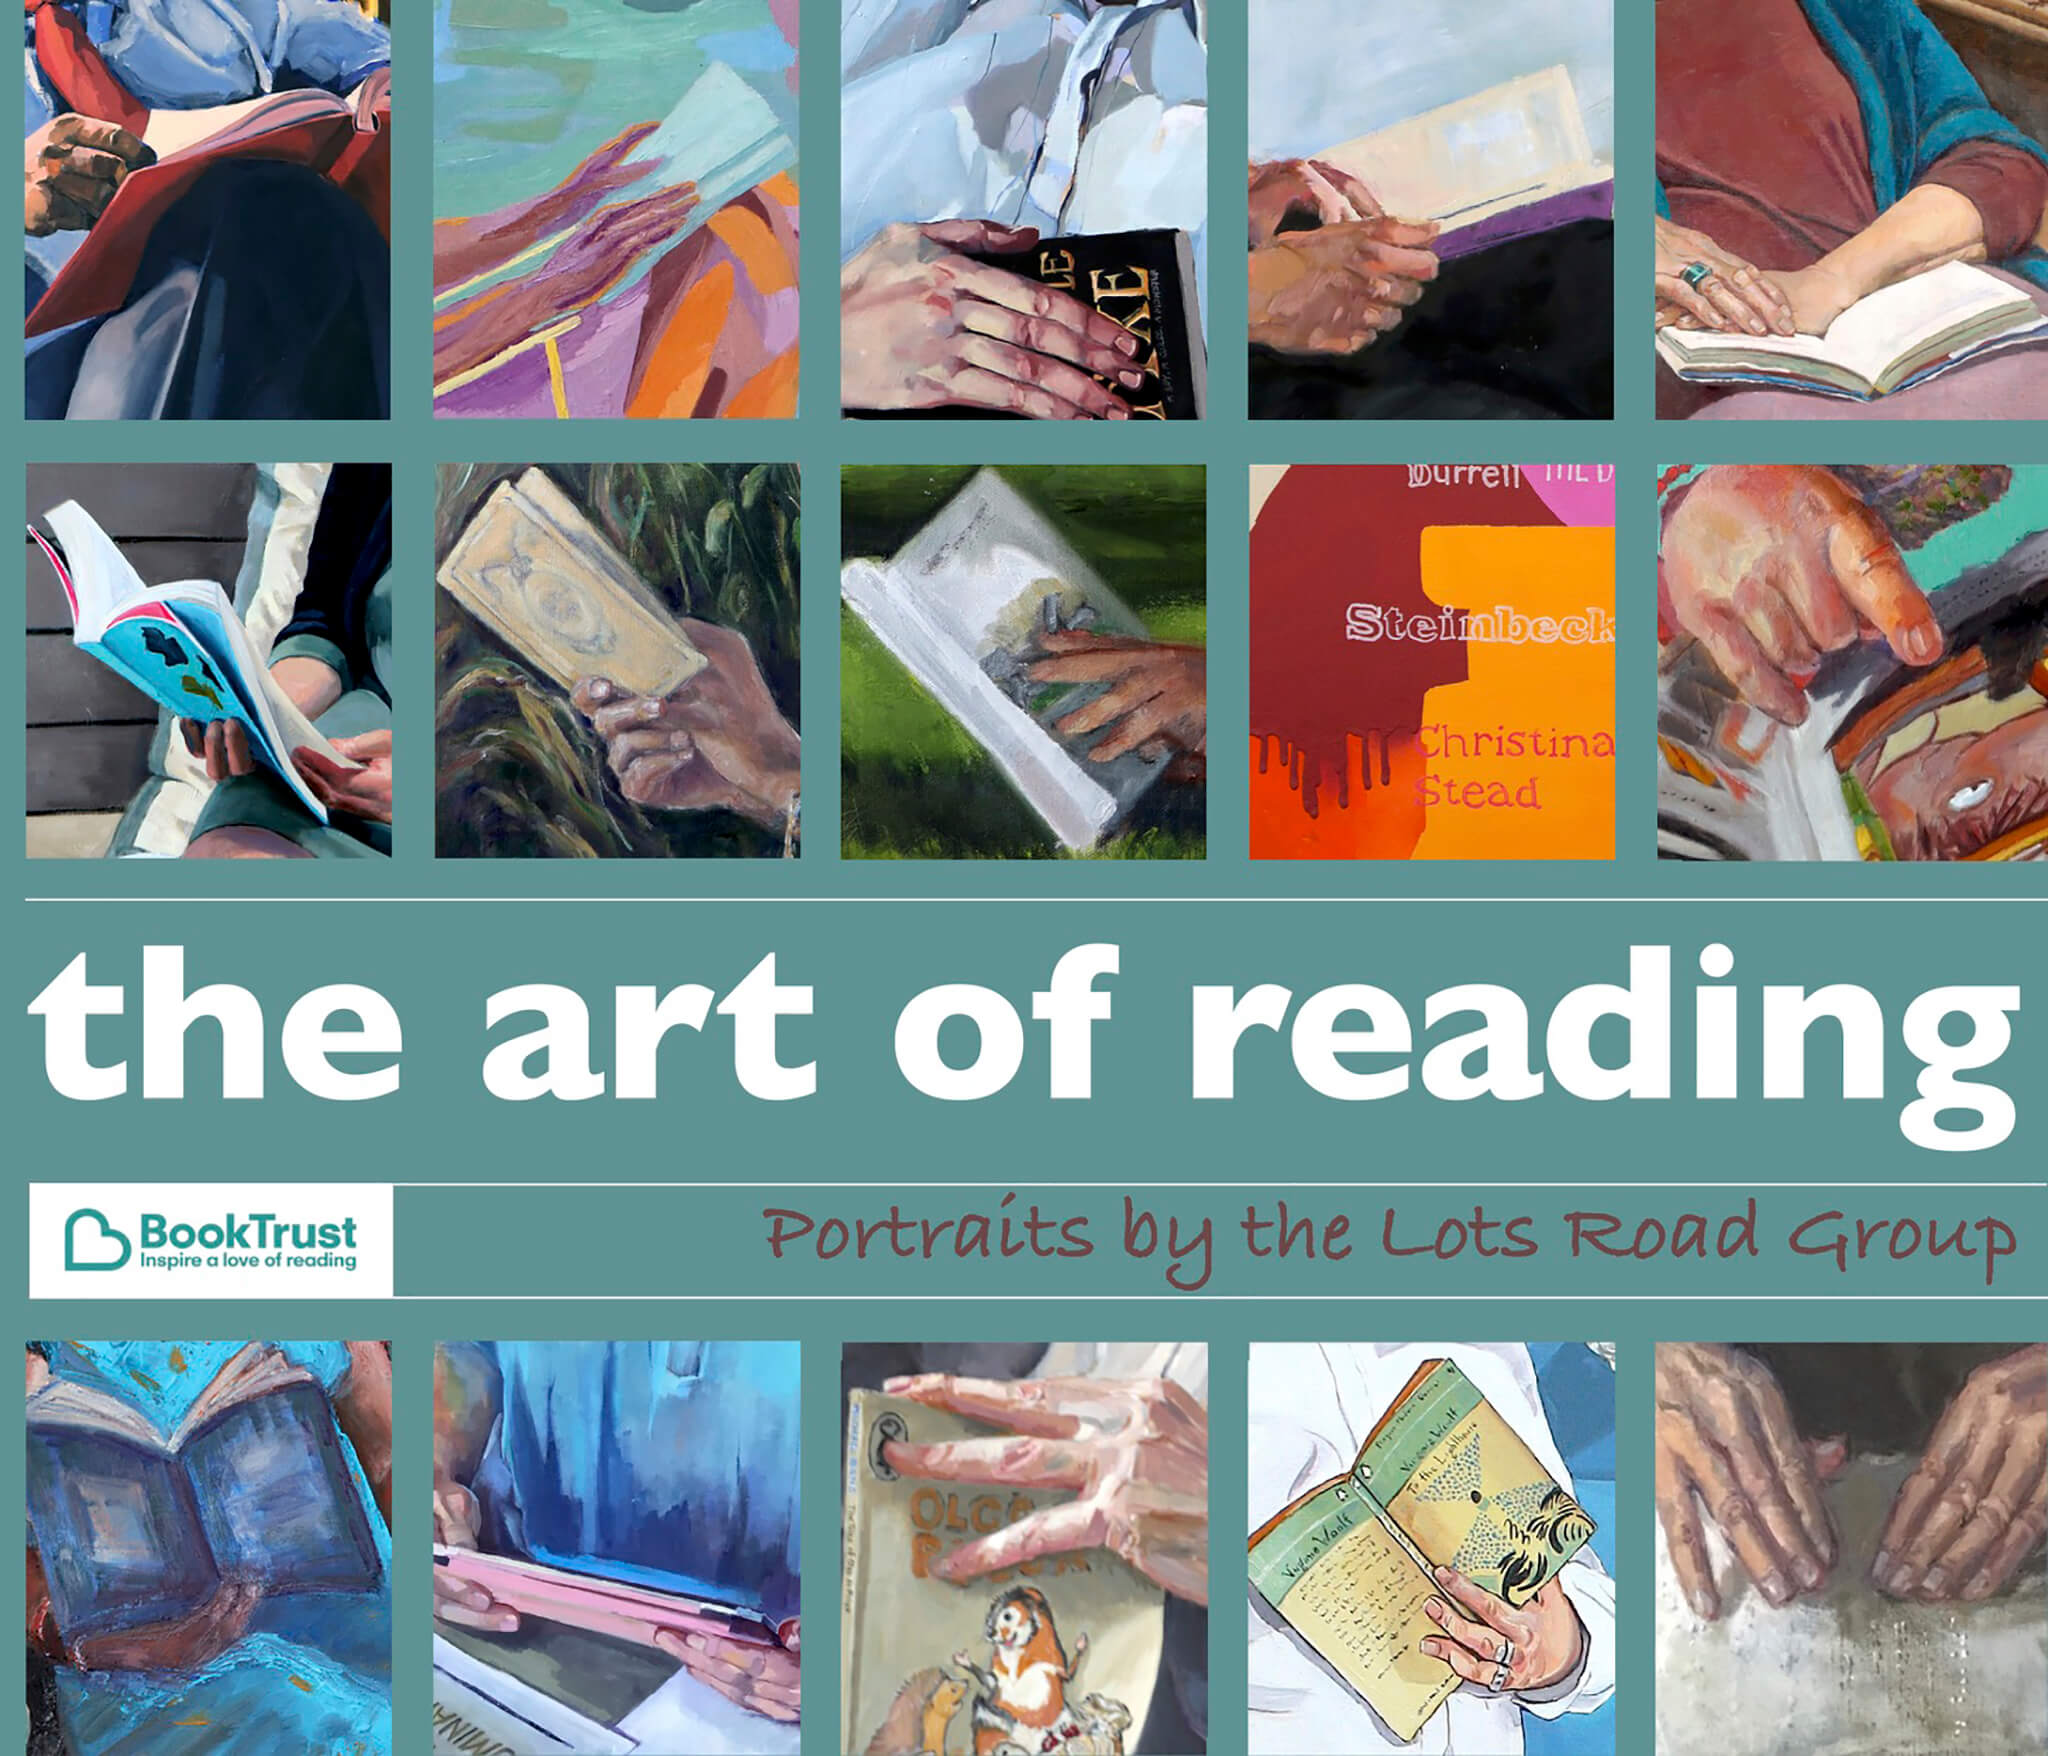 The Art of Reading by the Lots Road Group catalogue cover. 